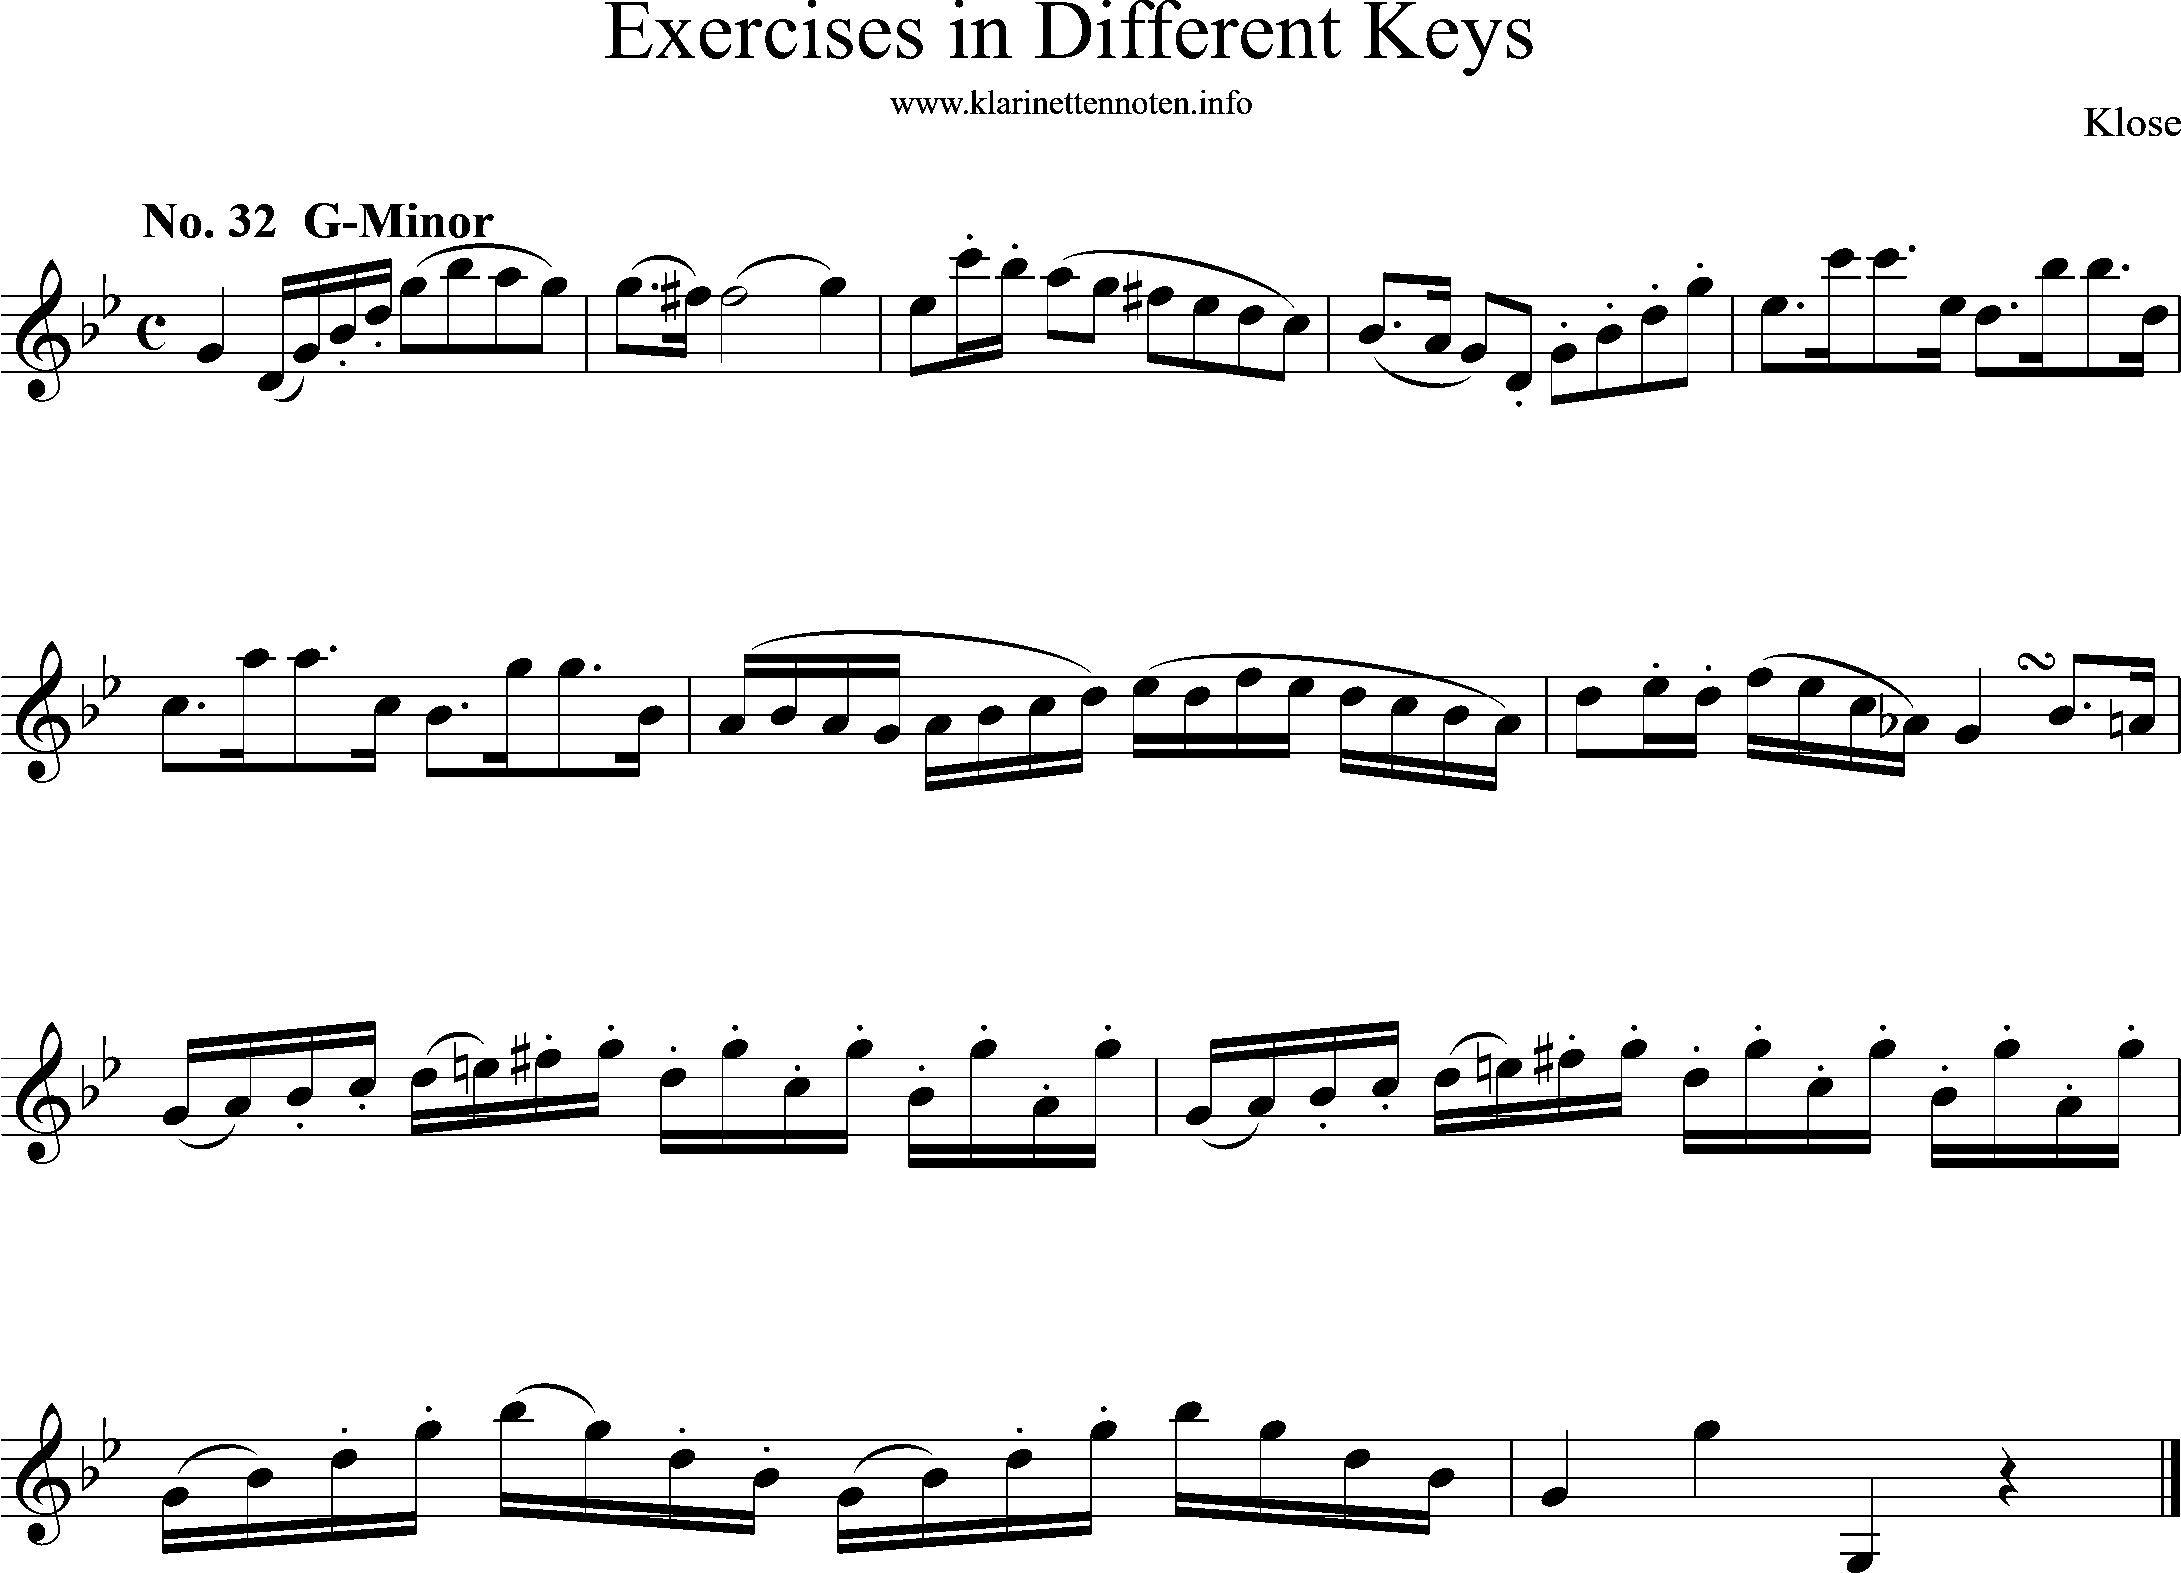 Exercises in Differewnt Keys, klose, No-32, g-minor